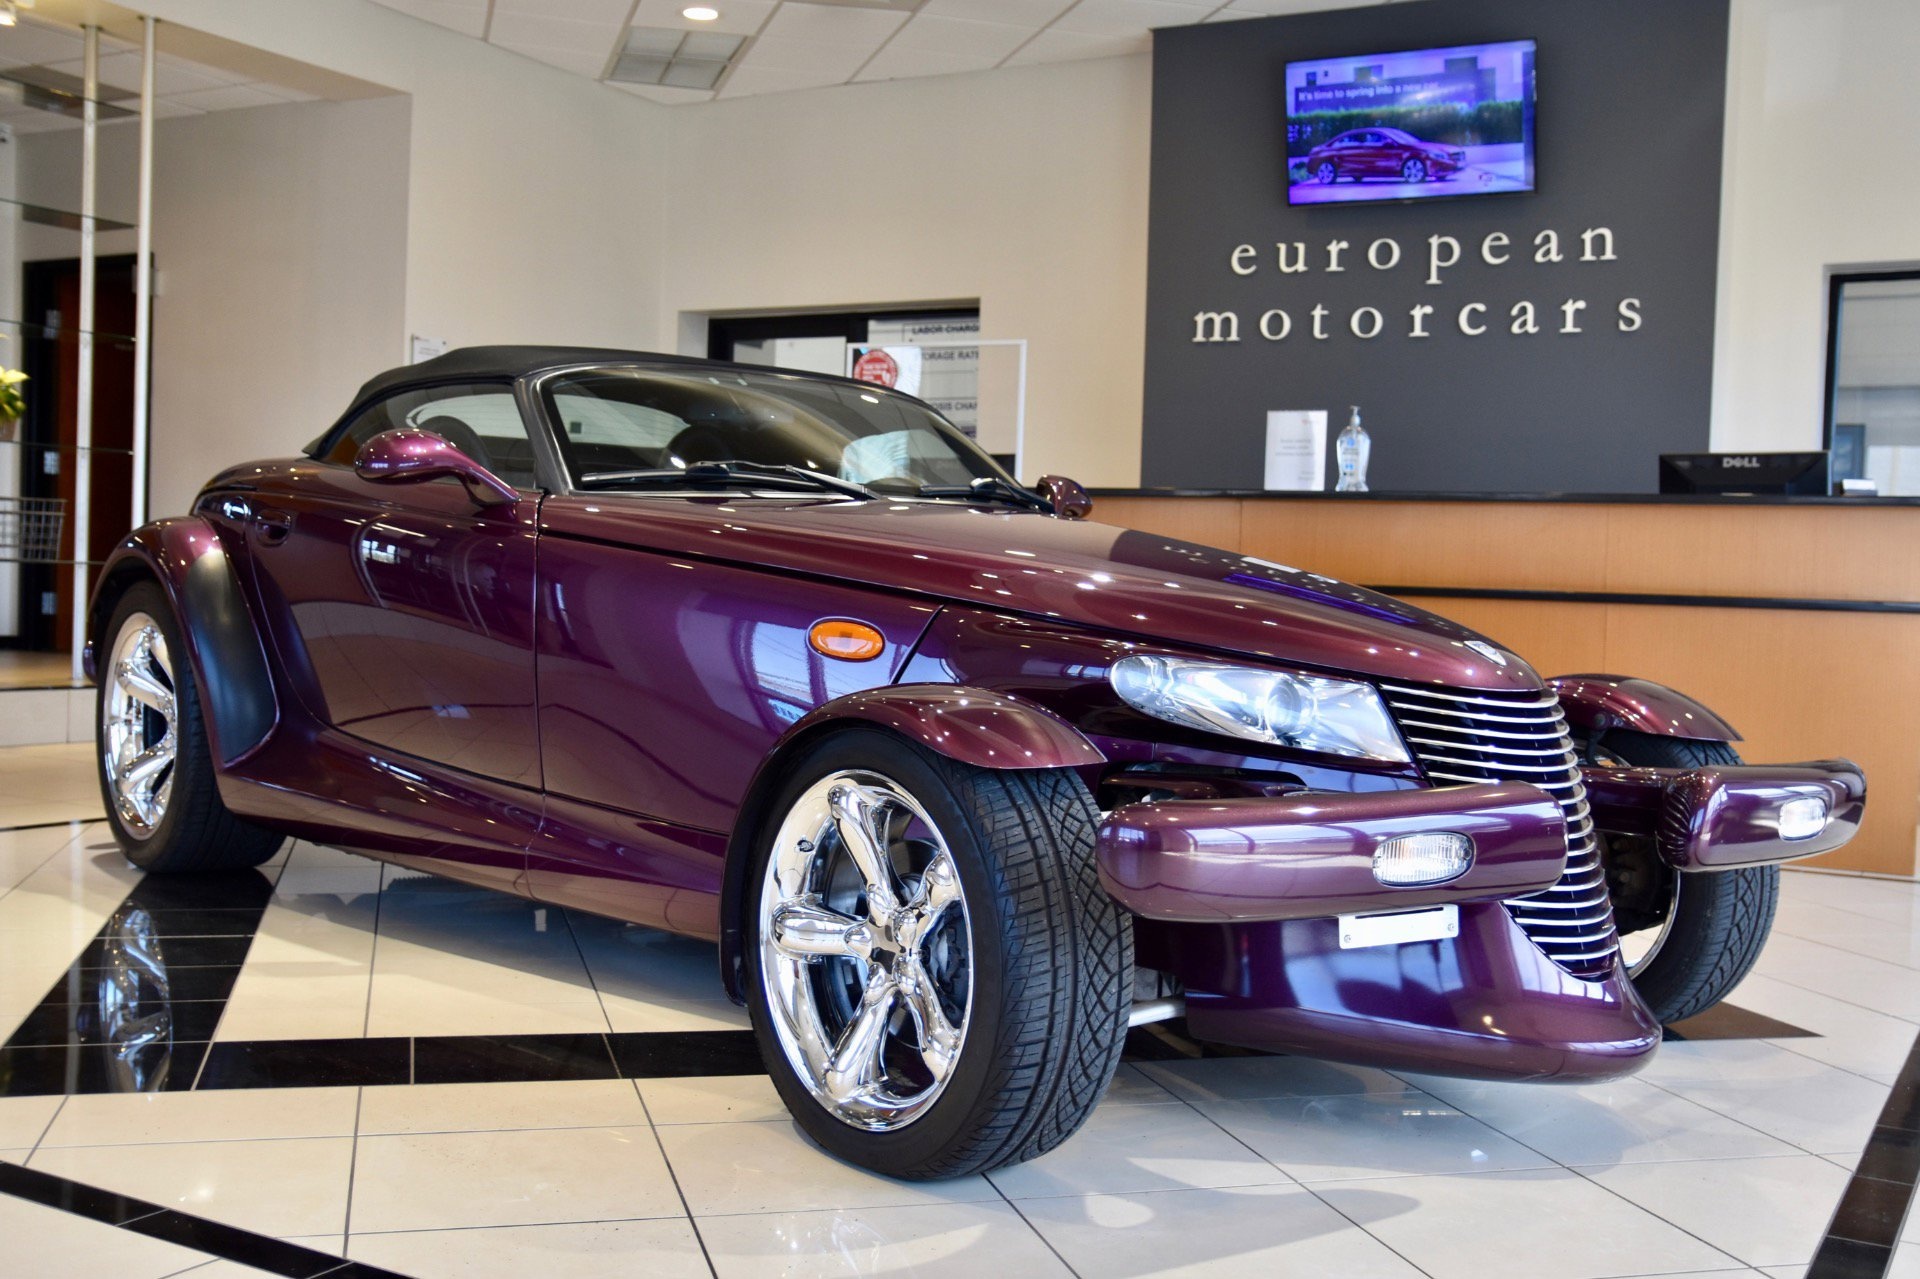 HD wallpaper, Used Model, Desktop Hd Plymouth Prowler Wallpaper Image, Plymouth Prowler, 1920X1280 Hd Desktop, For Sale, Autotrader